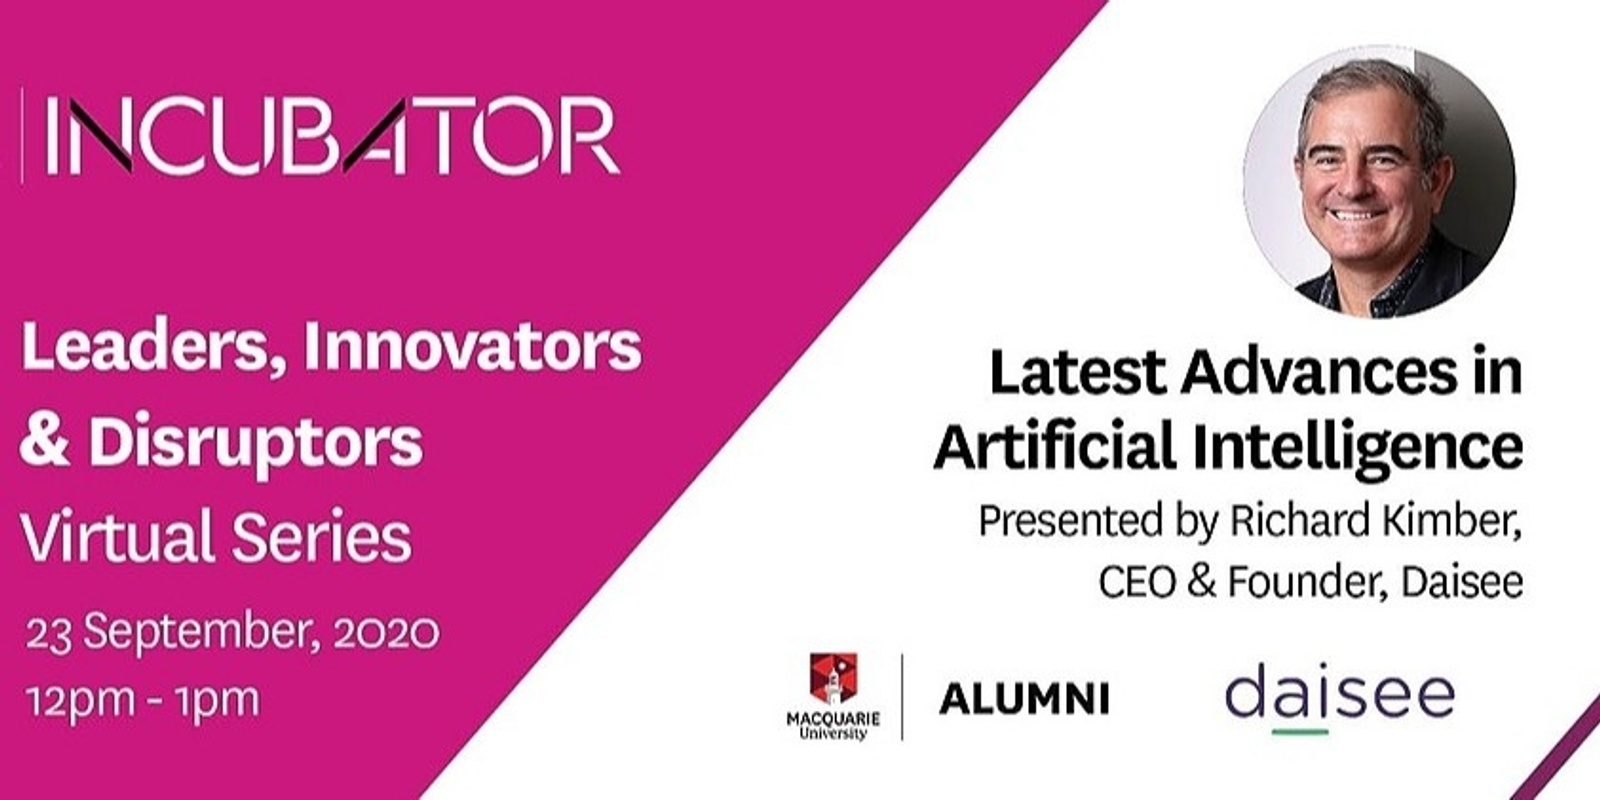 Banner image for MQ Incubator Leaders, Innovators & Disrupters Event | Latest advances in AI with Richard Kimber